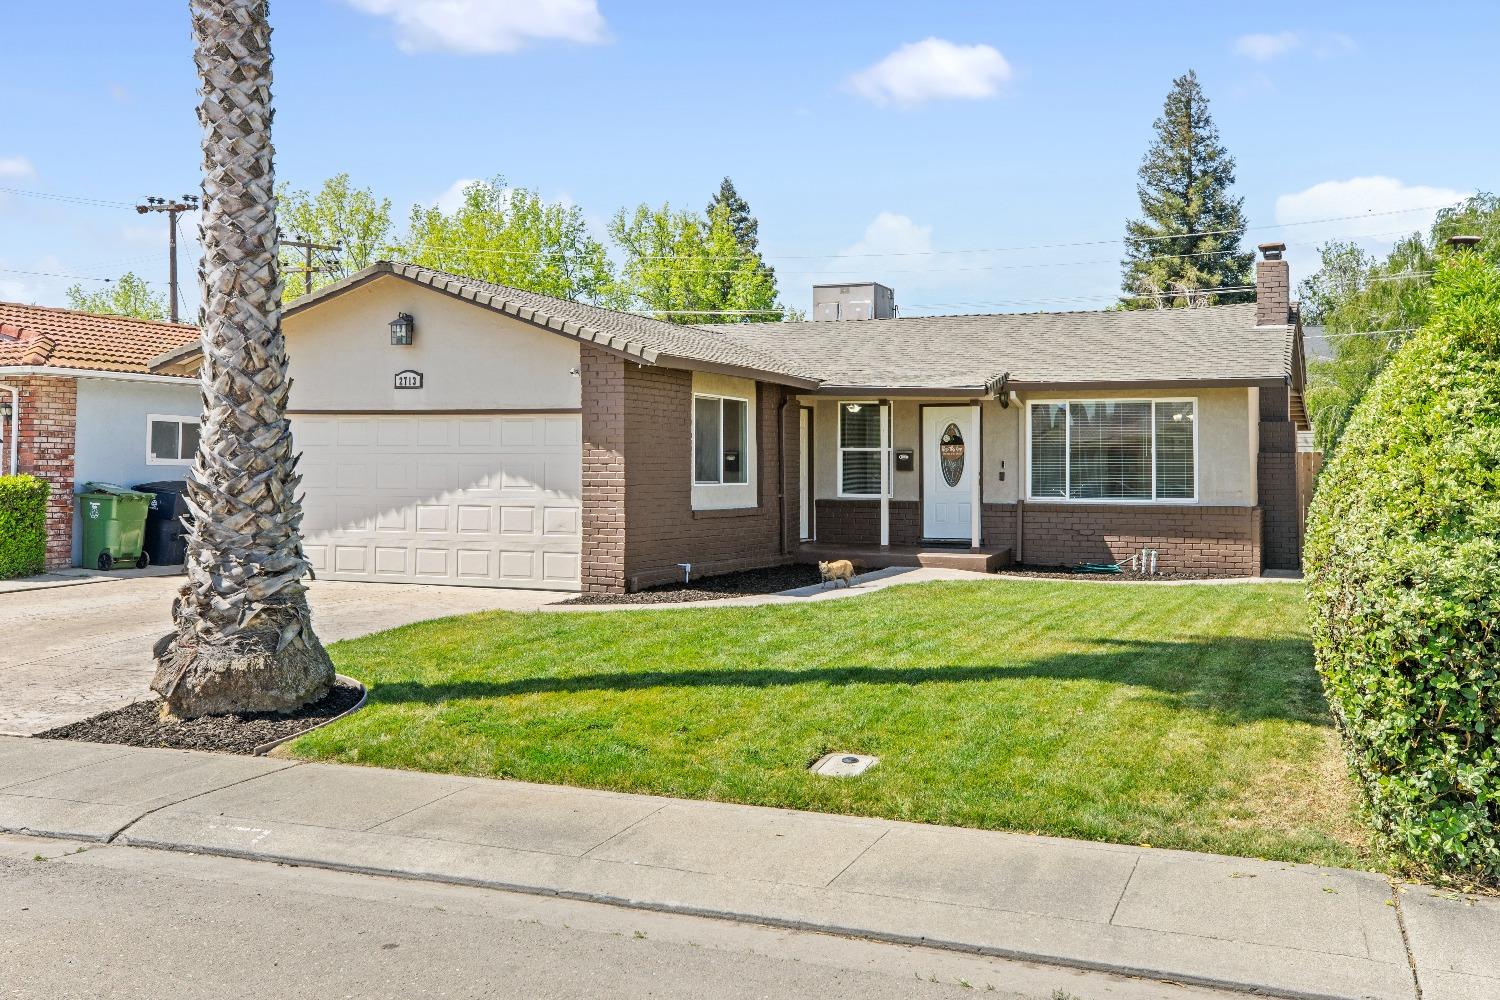 Photo of 2713 Buthmann Ave in Tracy, CA